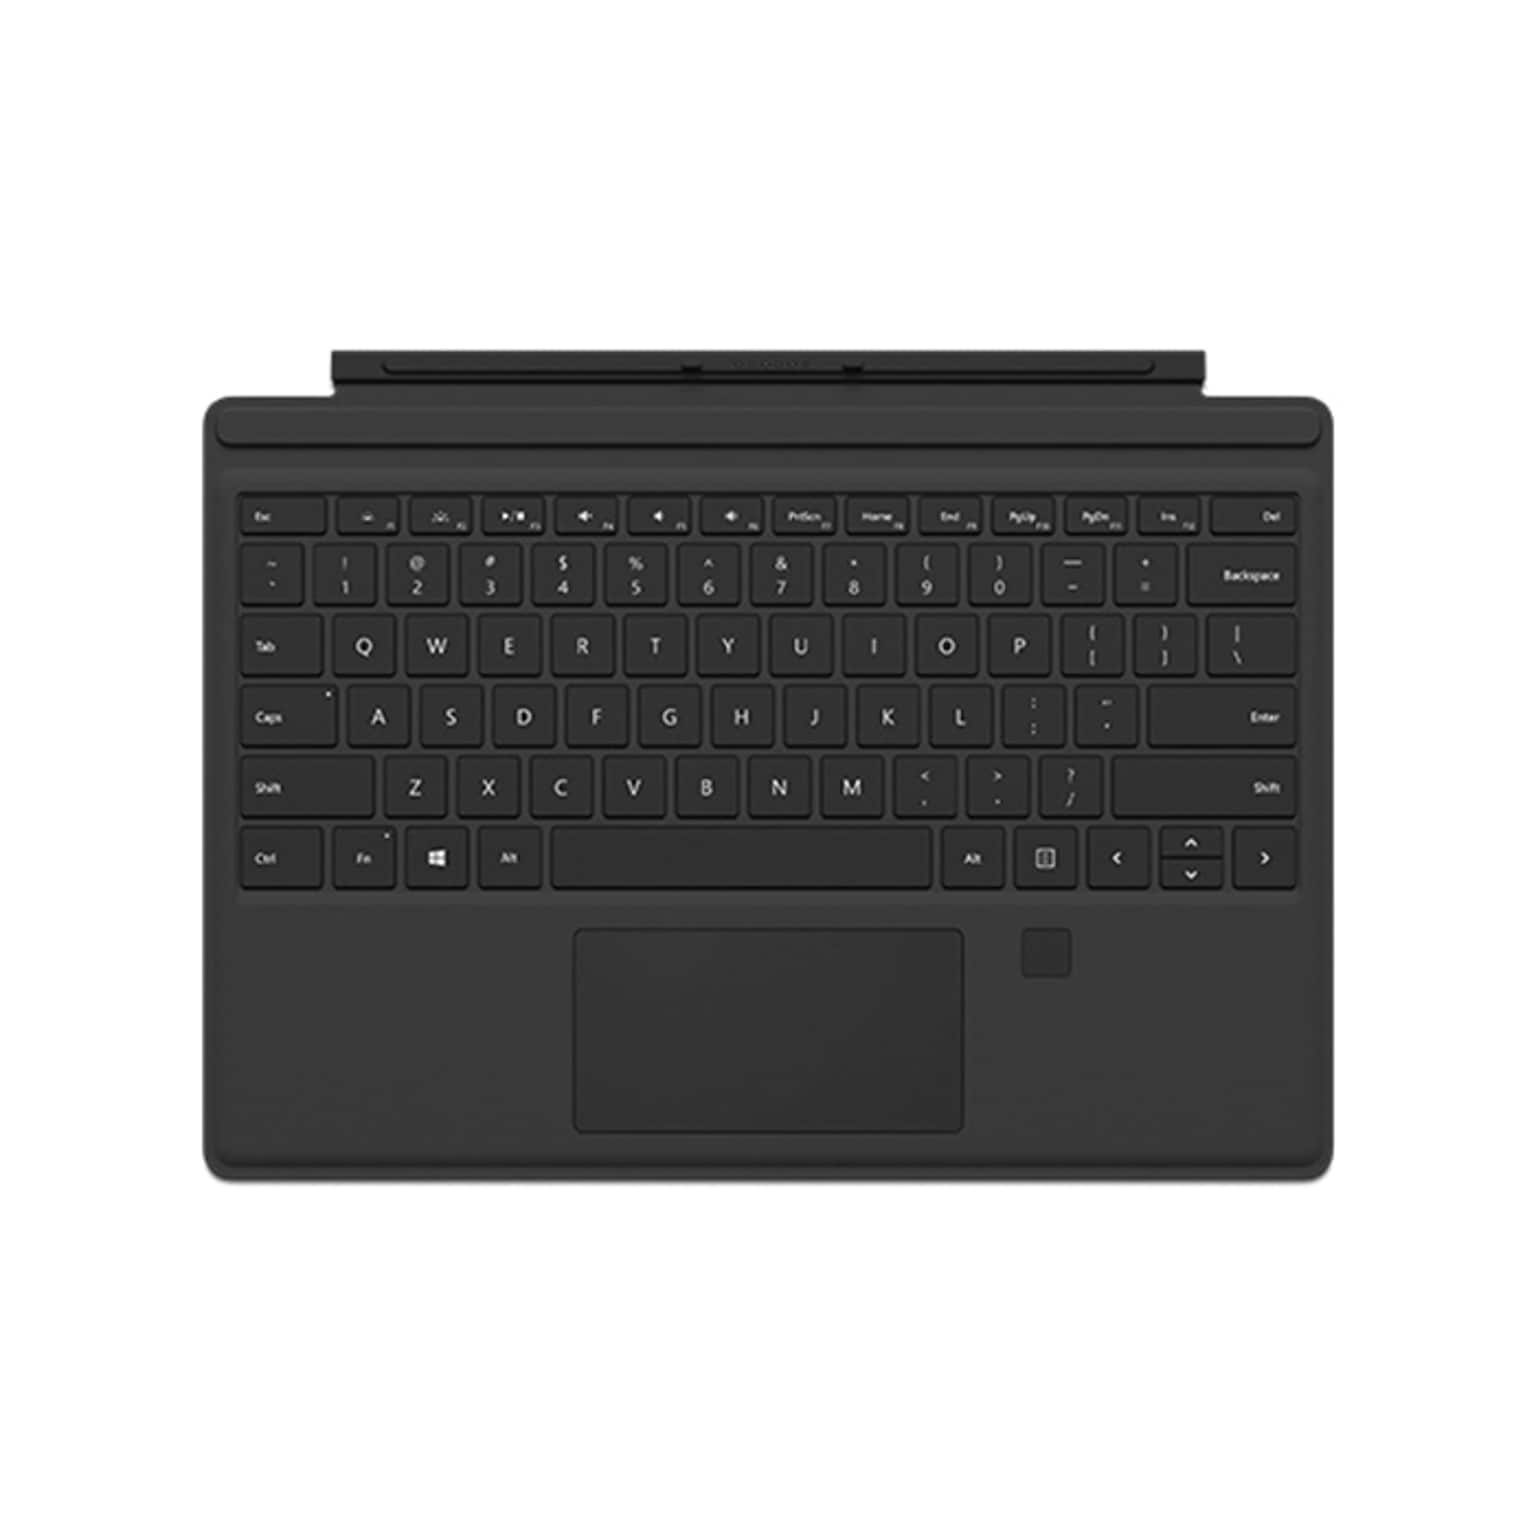 Microsoft Surface Pro 4 Tablet Cover With Fingerprint ID, Black (GK3-00001)